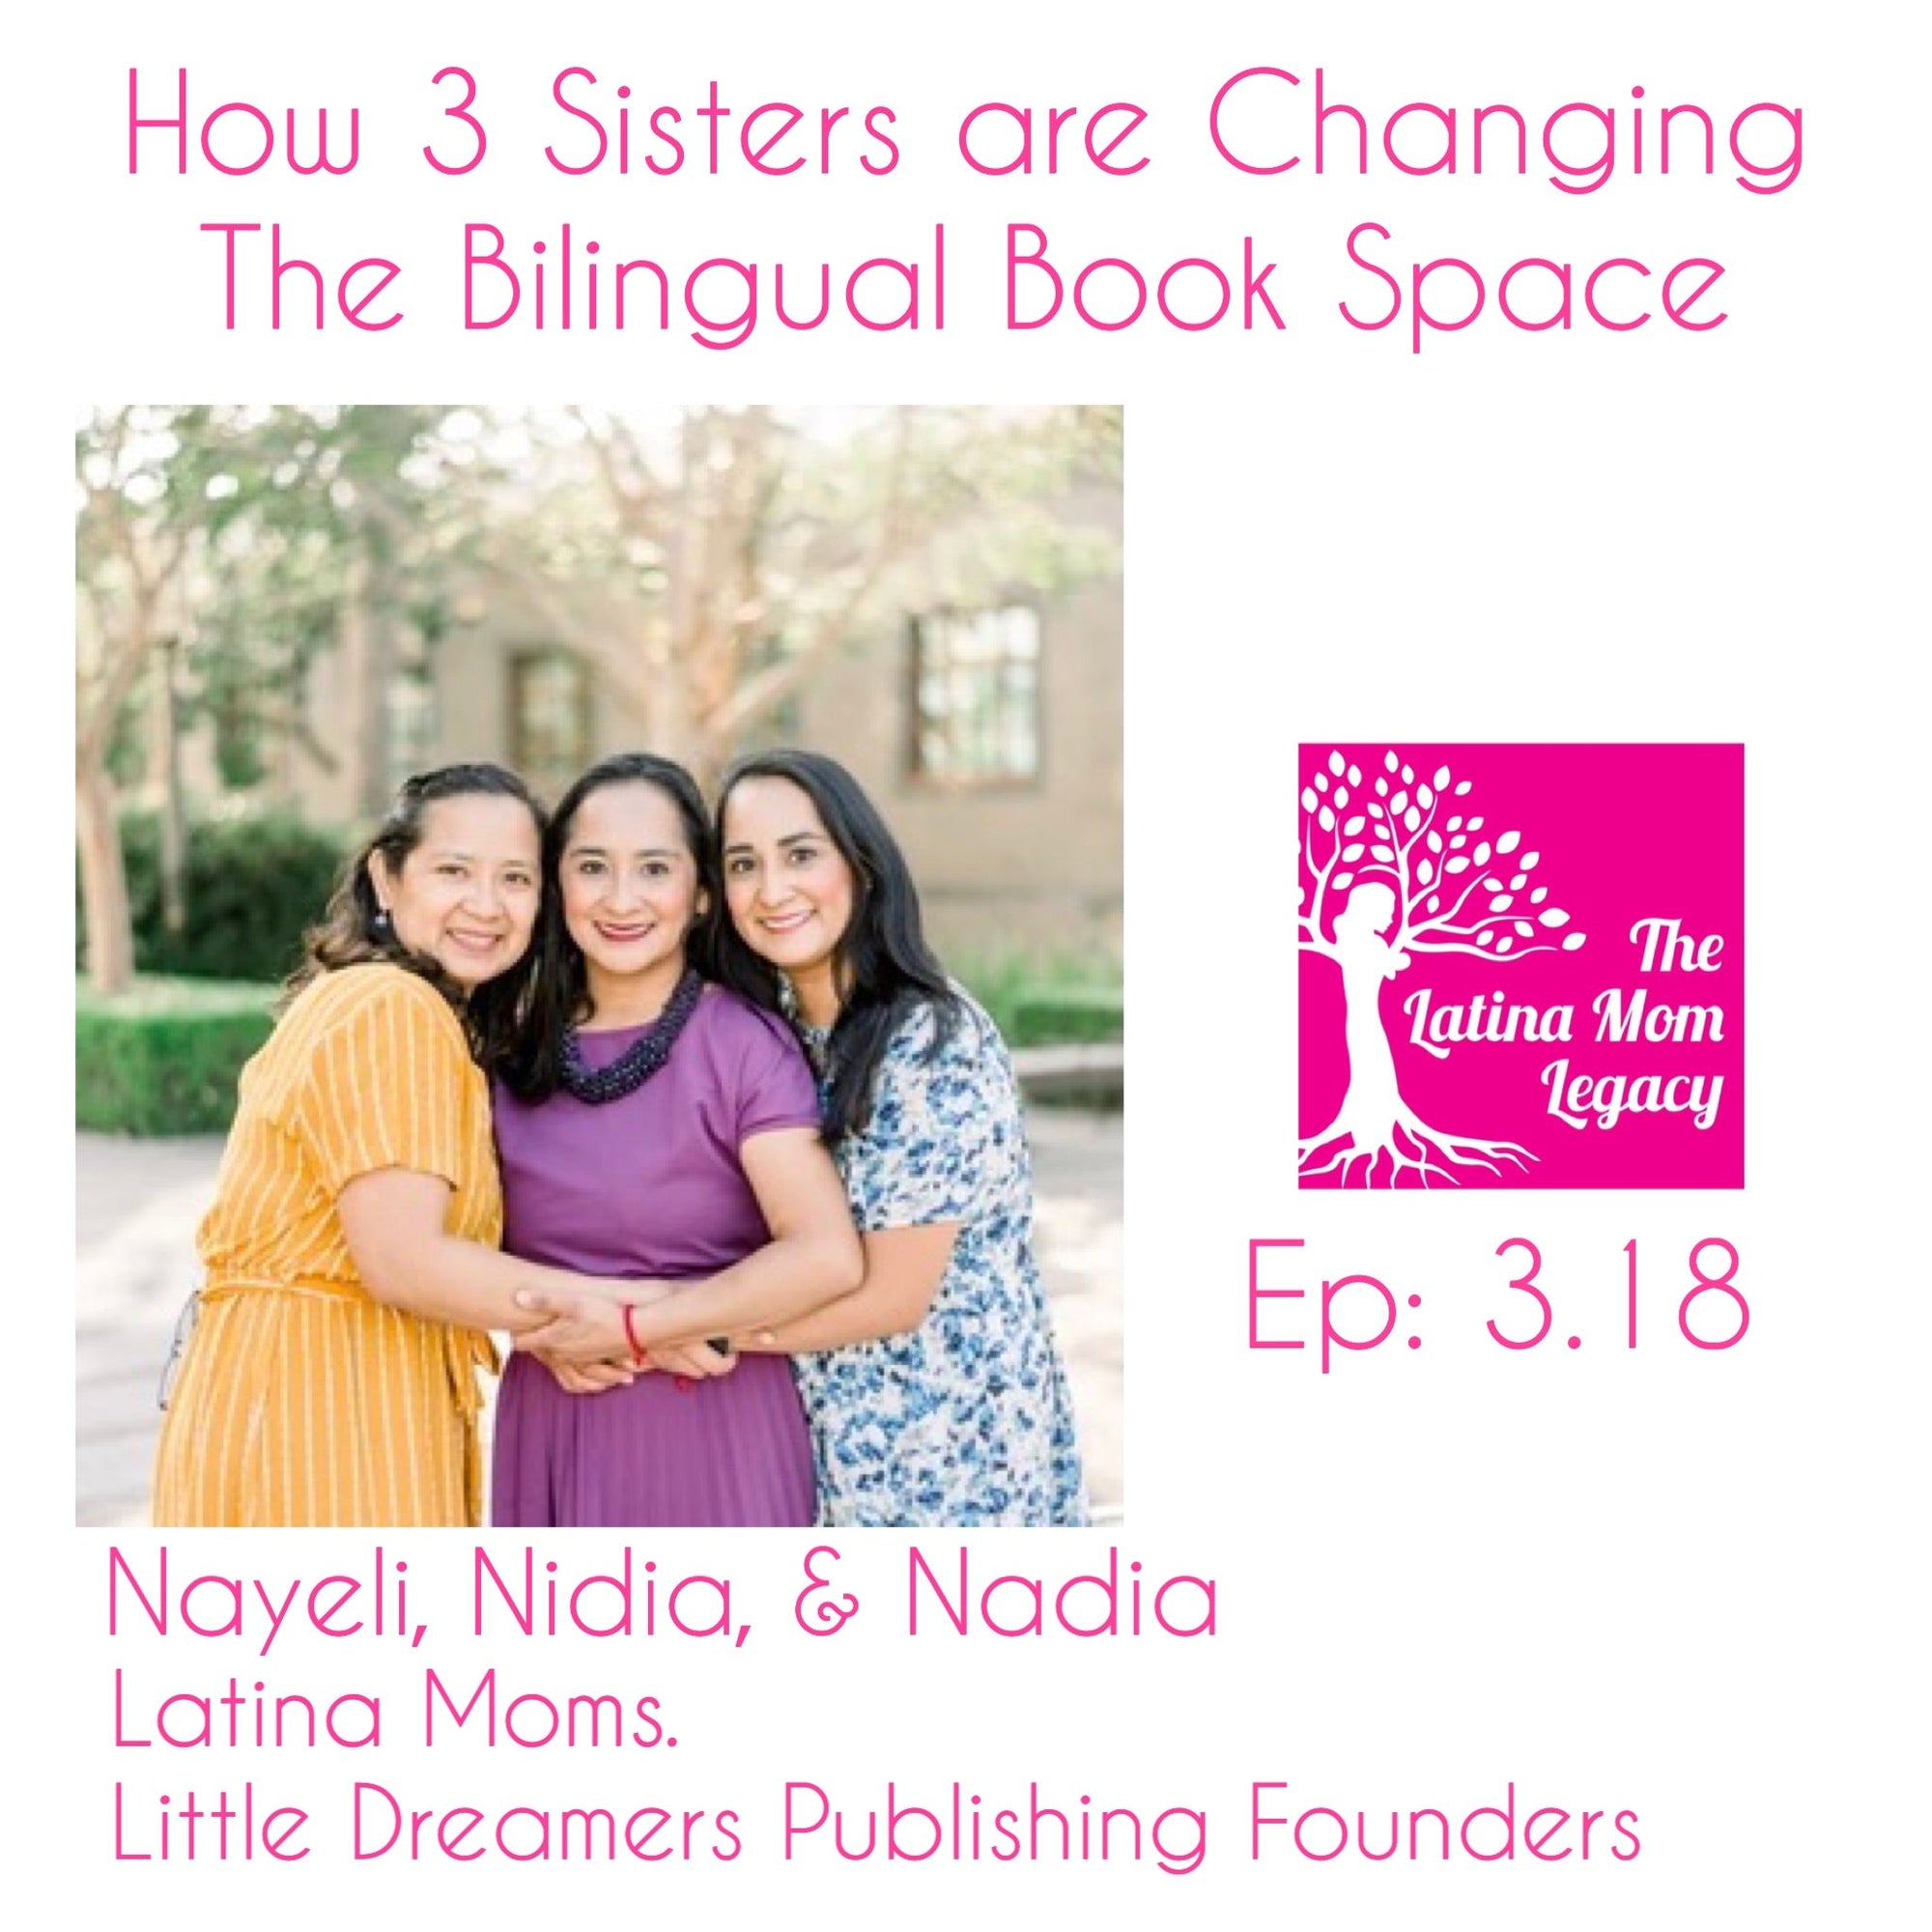 3.18 How Three Latina Sisters are Changing the Bilingual Book Landscape - Mi LegaSi